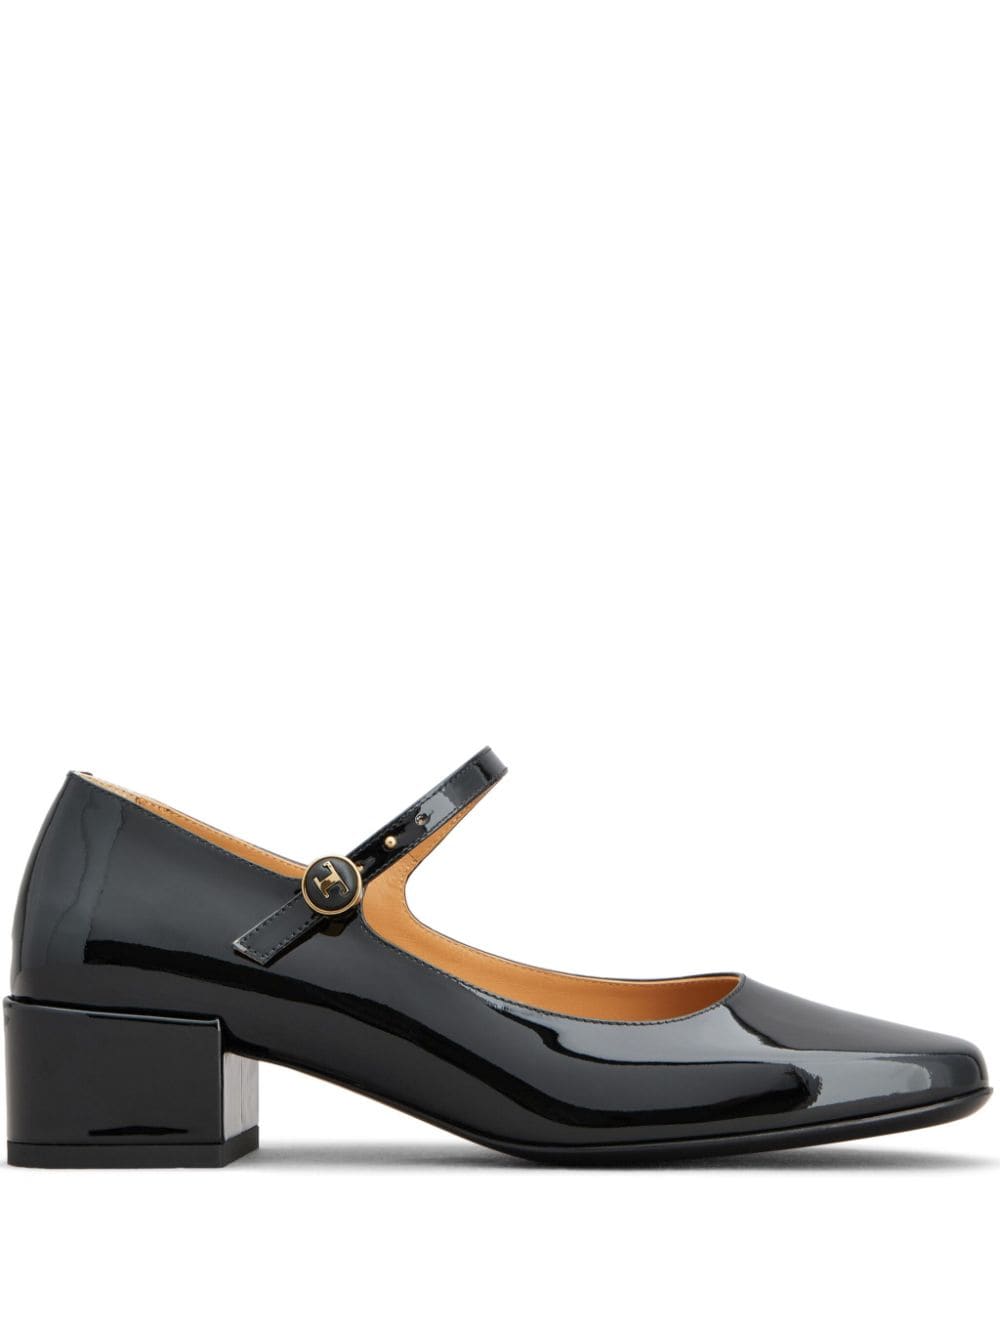 TOD'S LEATHER PUMPS